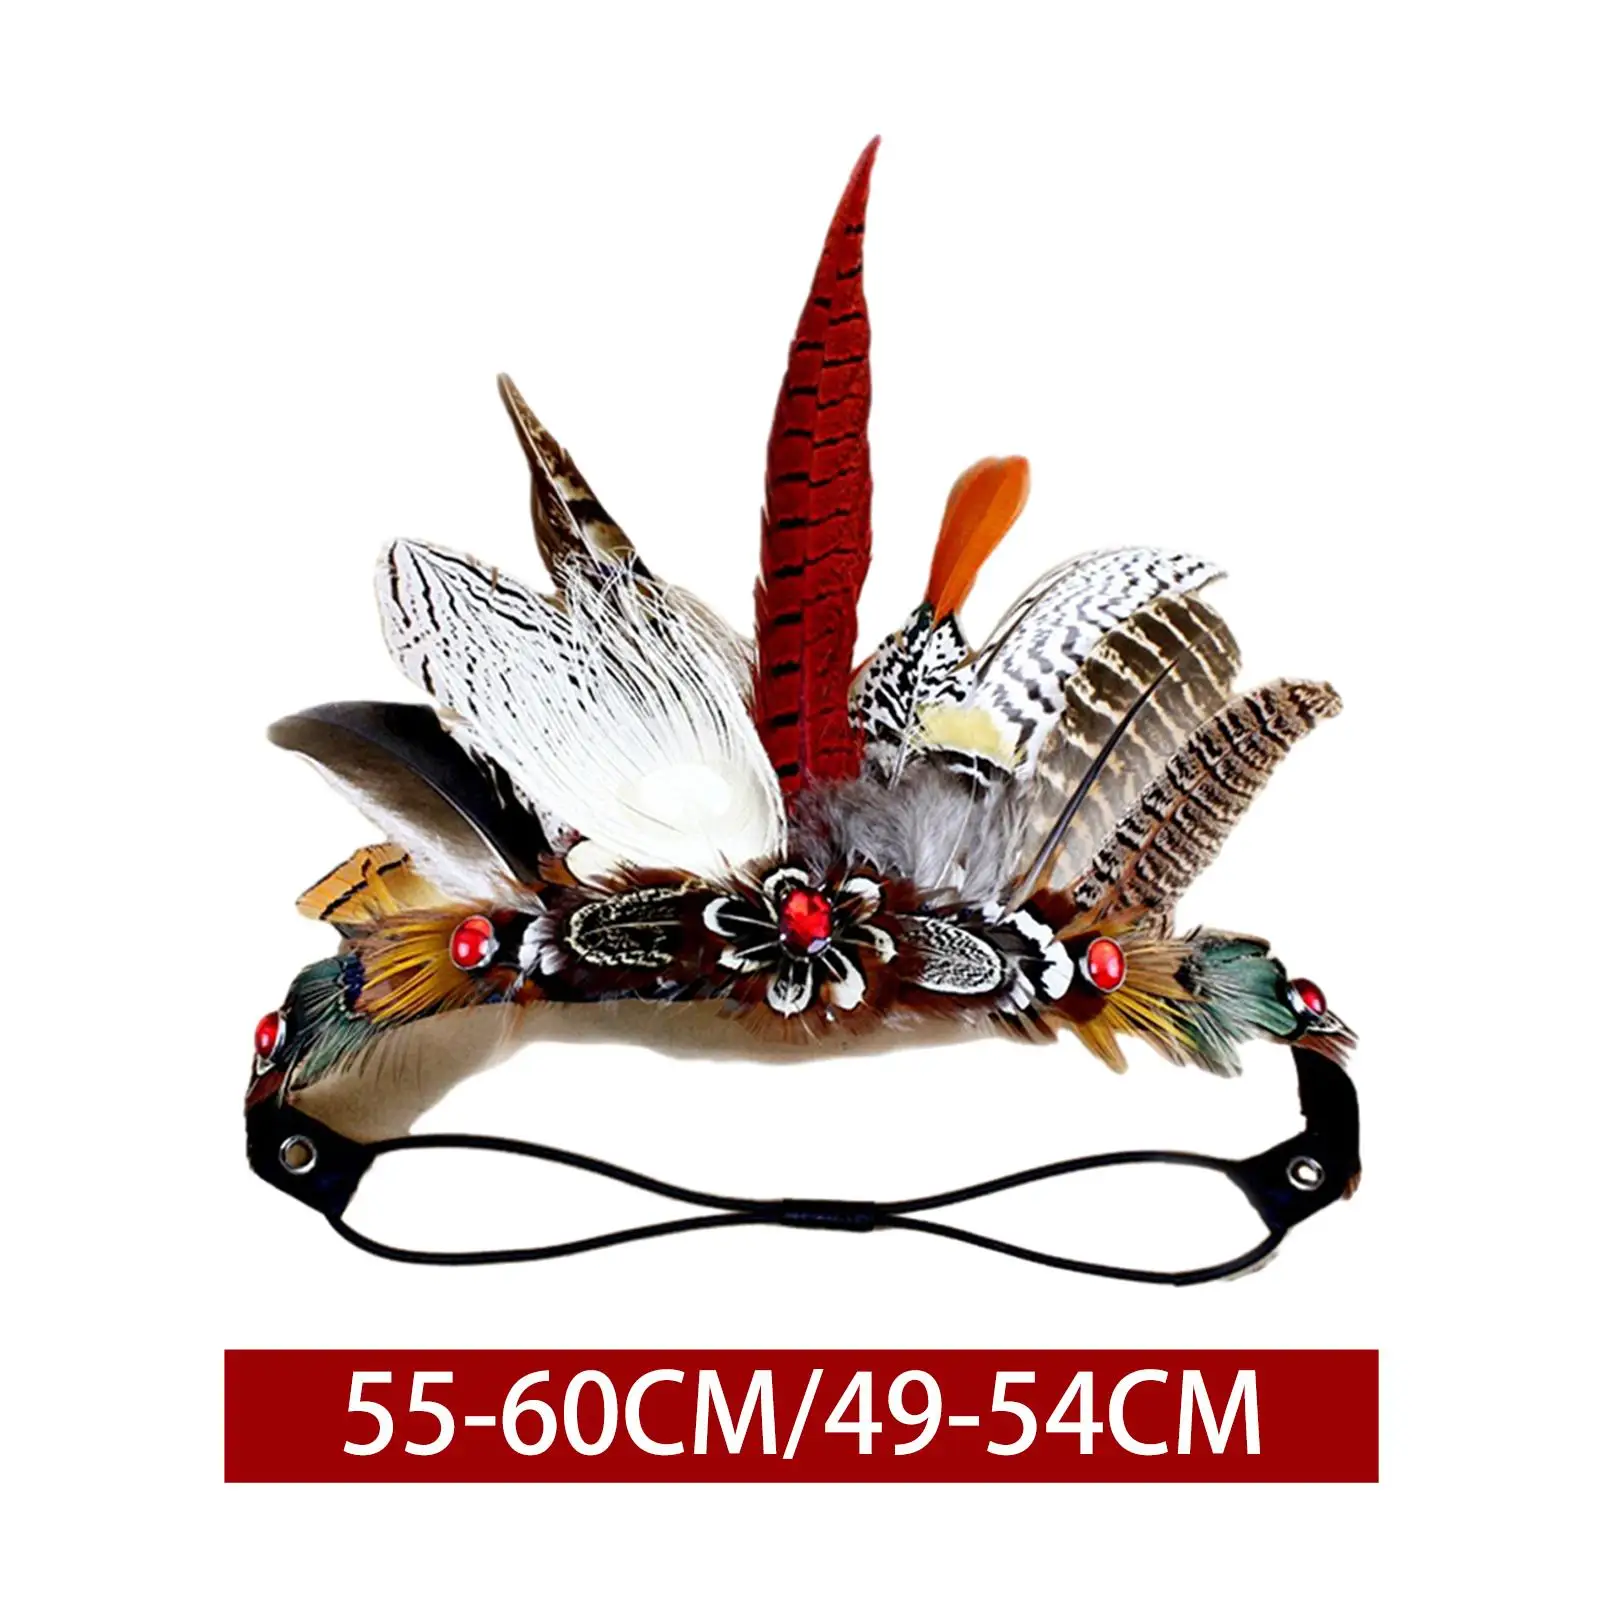 

Feather Headdress Headband Costume Accessories American Chief Indian Headpiece for Mardi Gras Cosplay Masquerade Party Carnival